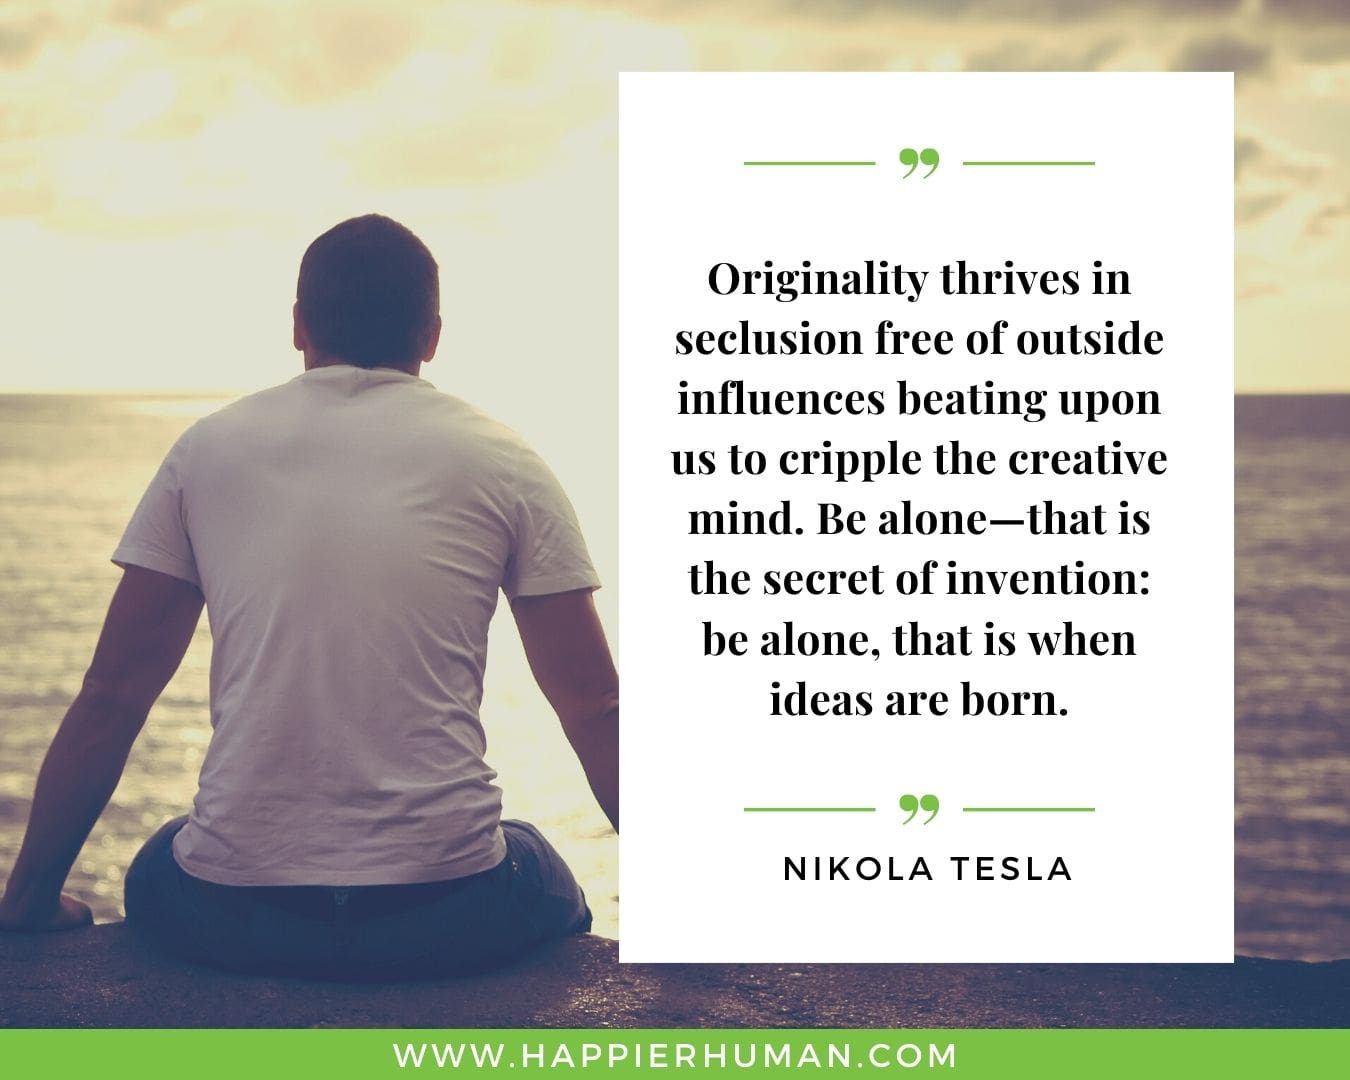 Introvert Quotes - “Originality thrives in seclusion free of outside influences beating upon us to cripple the creative mind. Be alone—that is the secret of invention: be alone, that is when ideas are born.” – Nikola Tesla